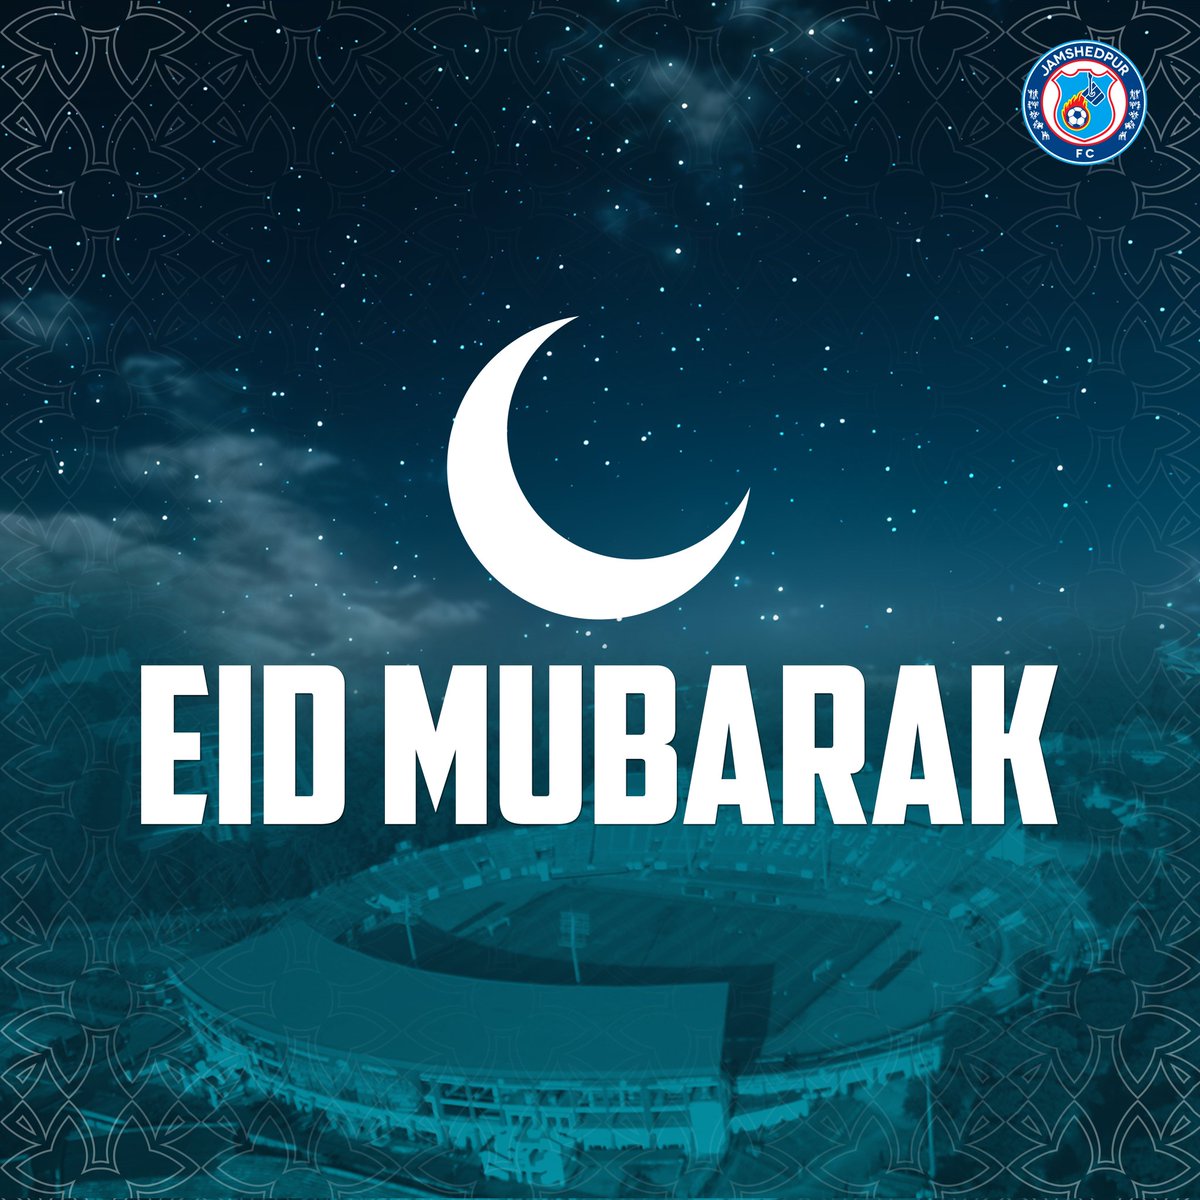 EID Mubarak from all of us at Jamshedpur FC! 🌙✨ May this festive occasion bring joy, peace, and blessings to you and your loved ones. #JamKeKhelo #festivevibes #eid #eidmubarak